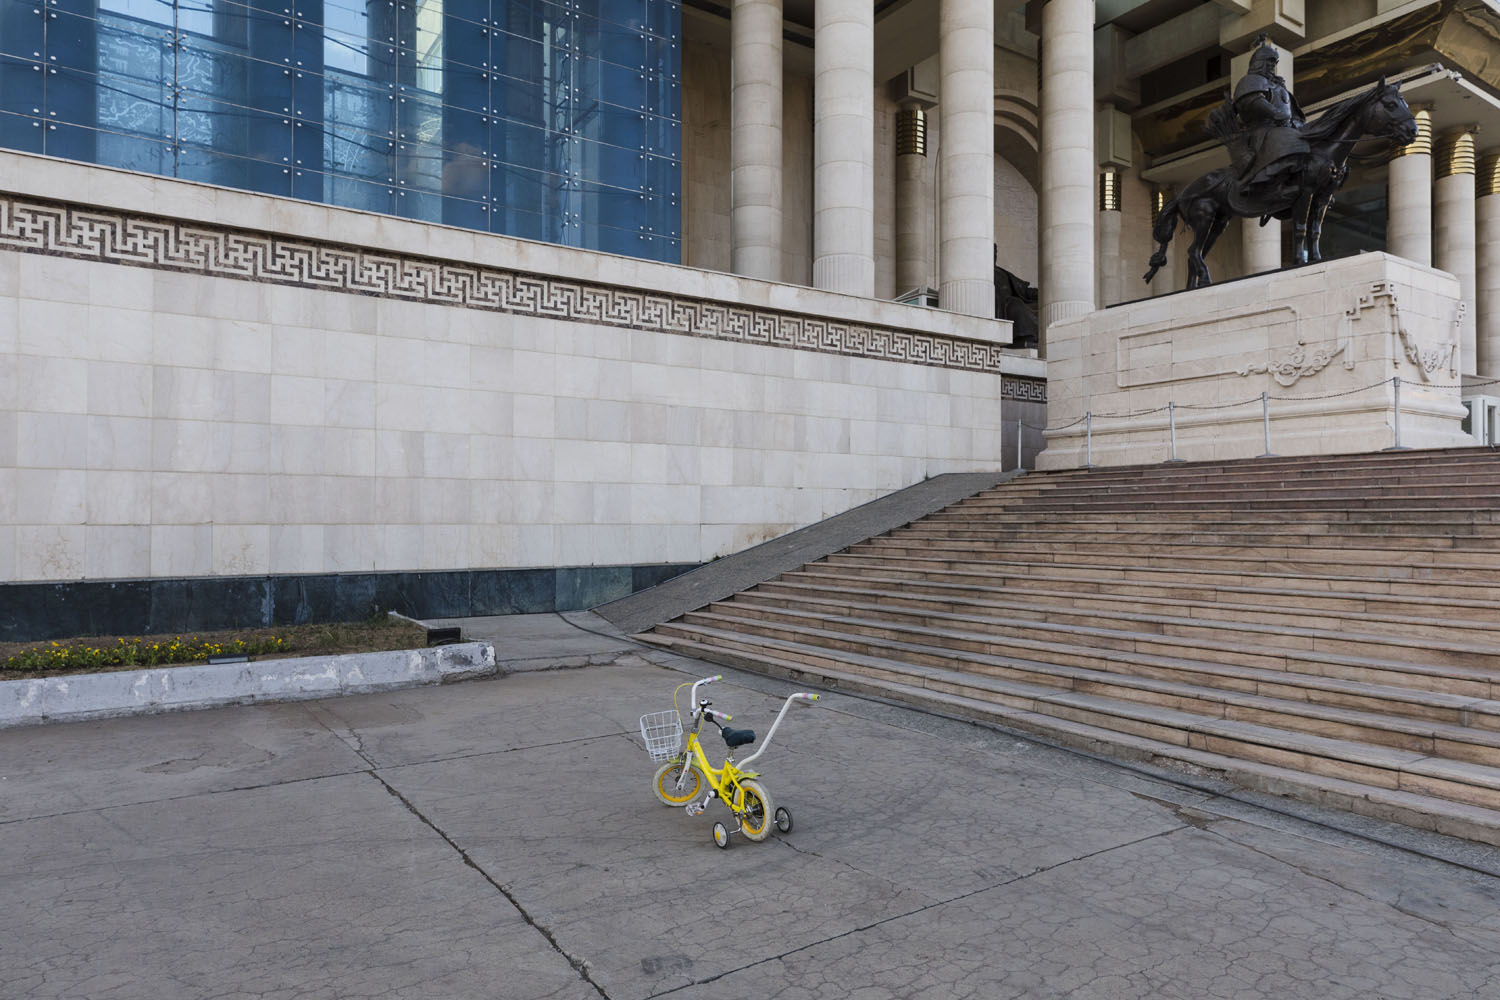 A toddler's tricycle in front of the parliament building in Genghis Khan Square. Ulaanbaatar, Mongolia. 2018.